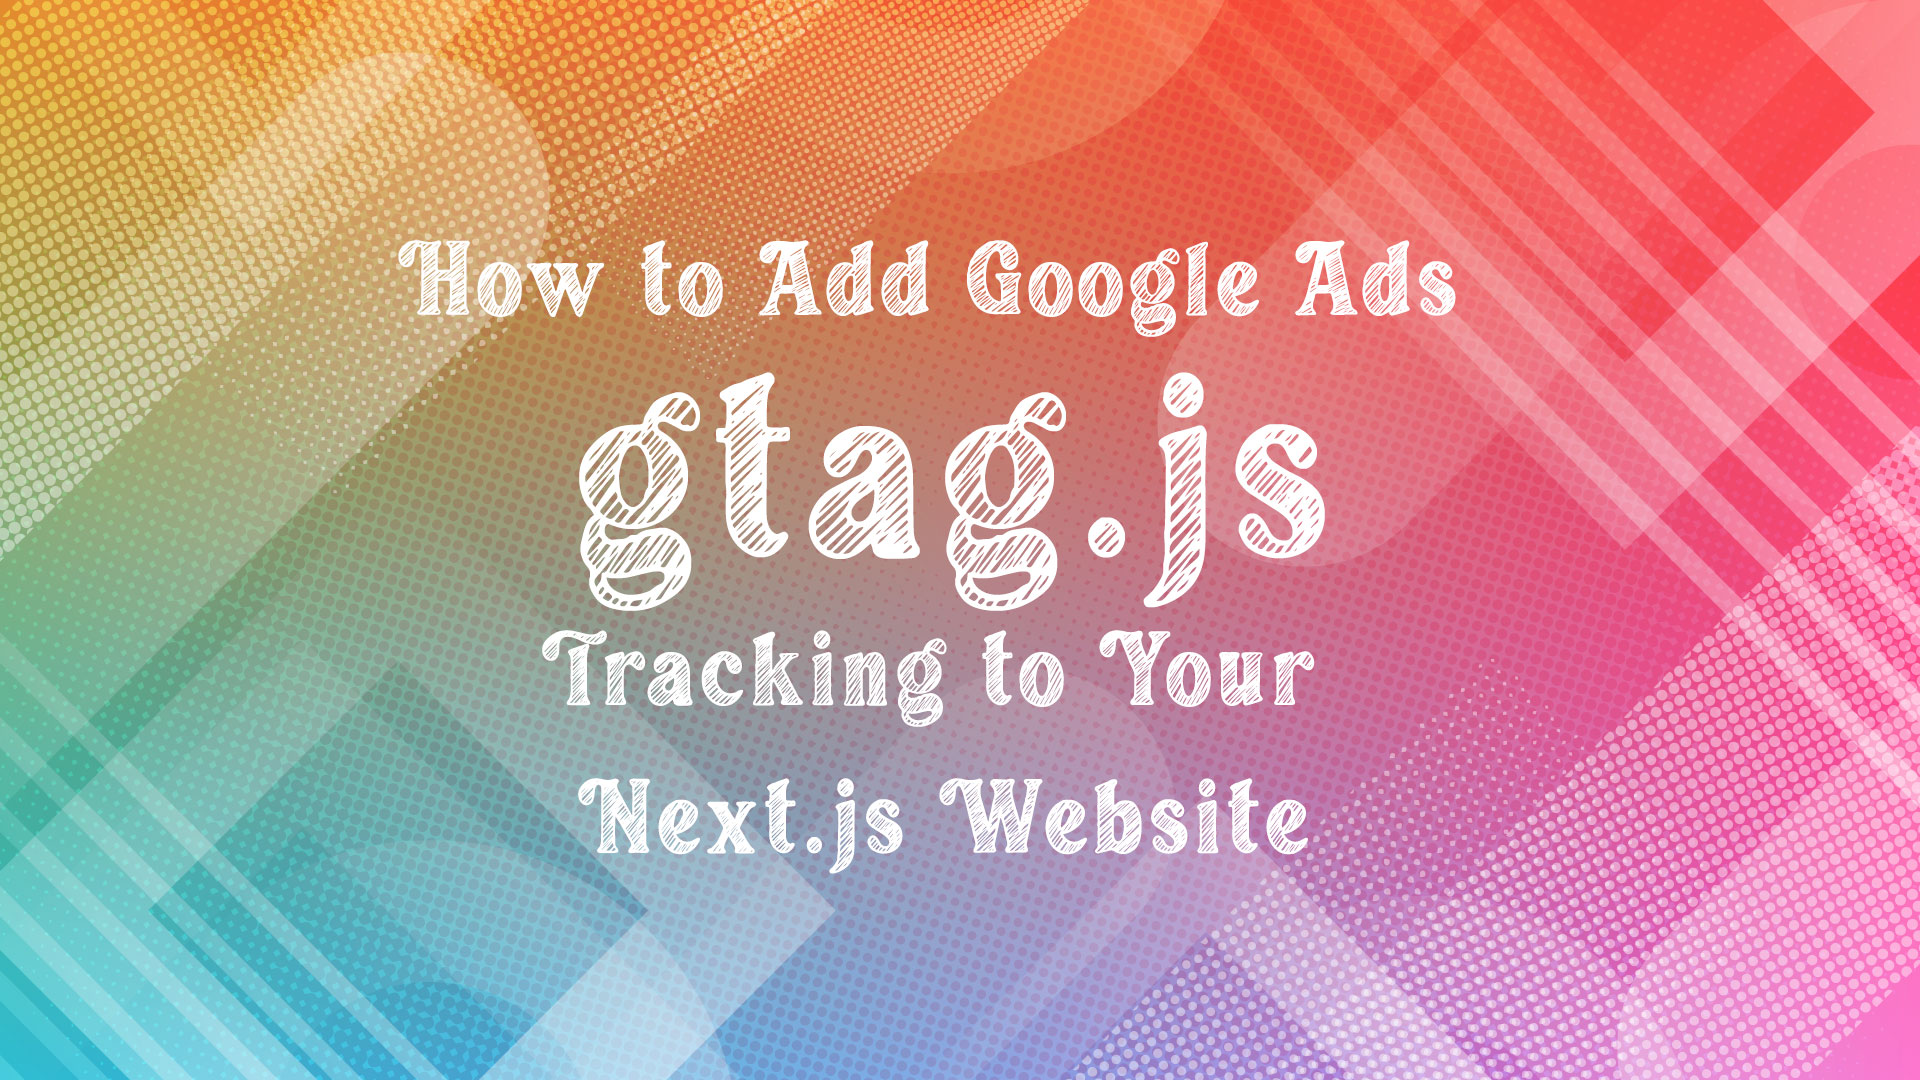 How to Add Google Ads gtag.js to Your Next.js Website